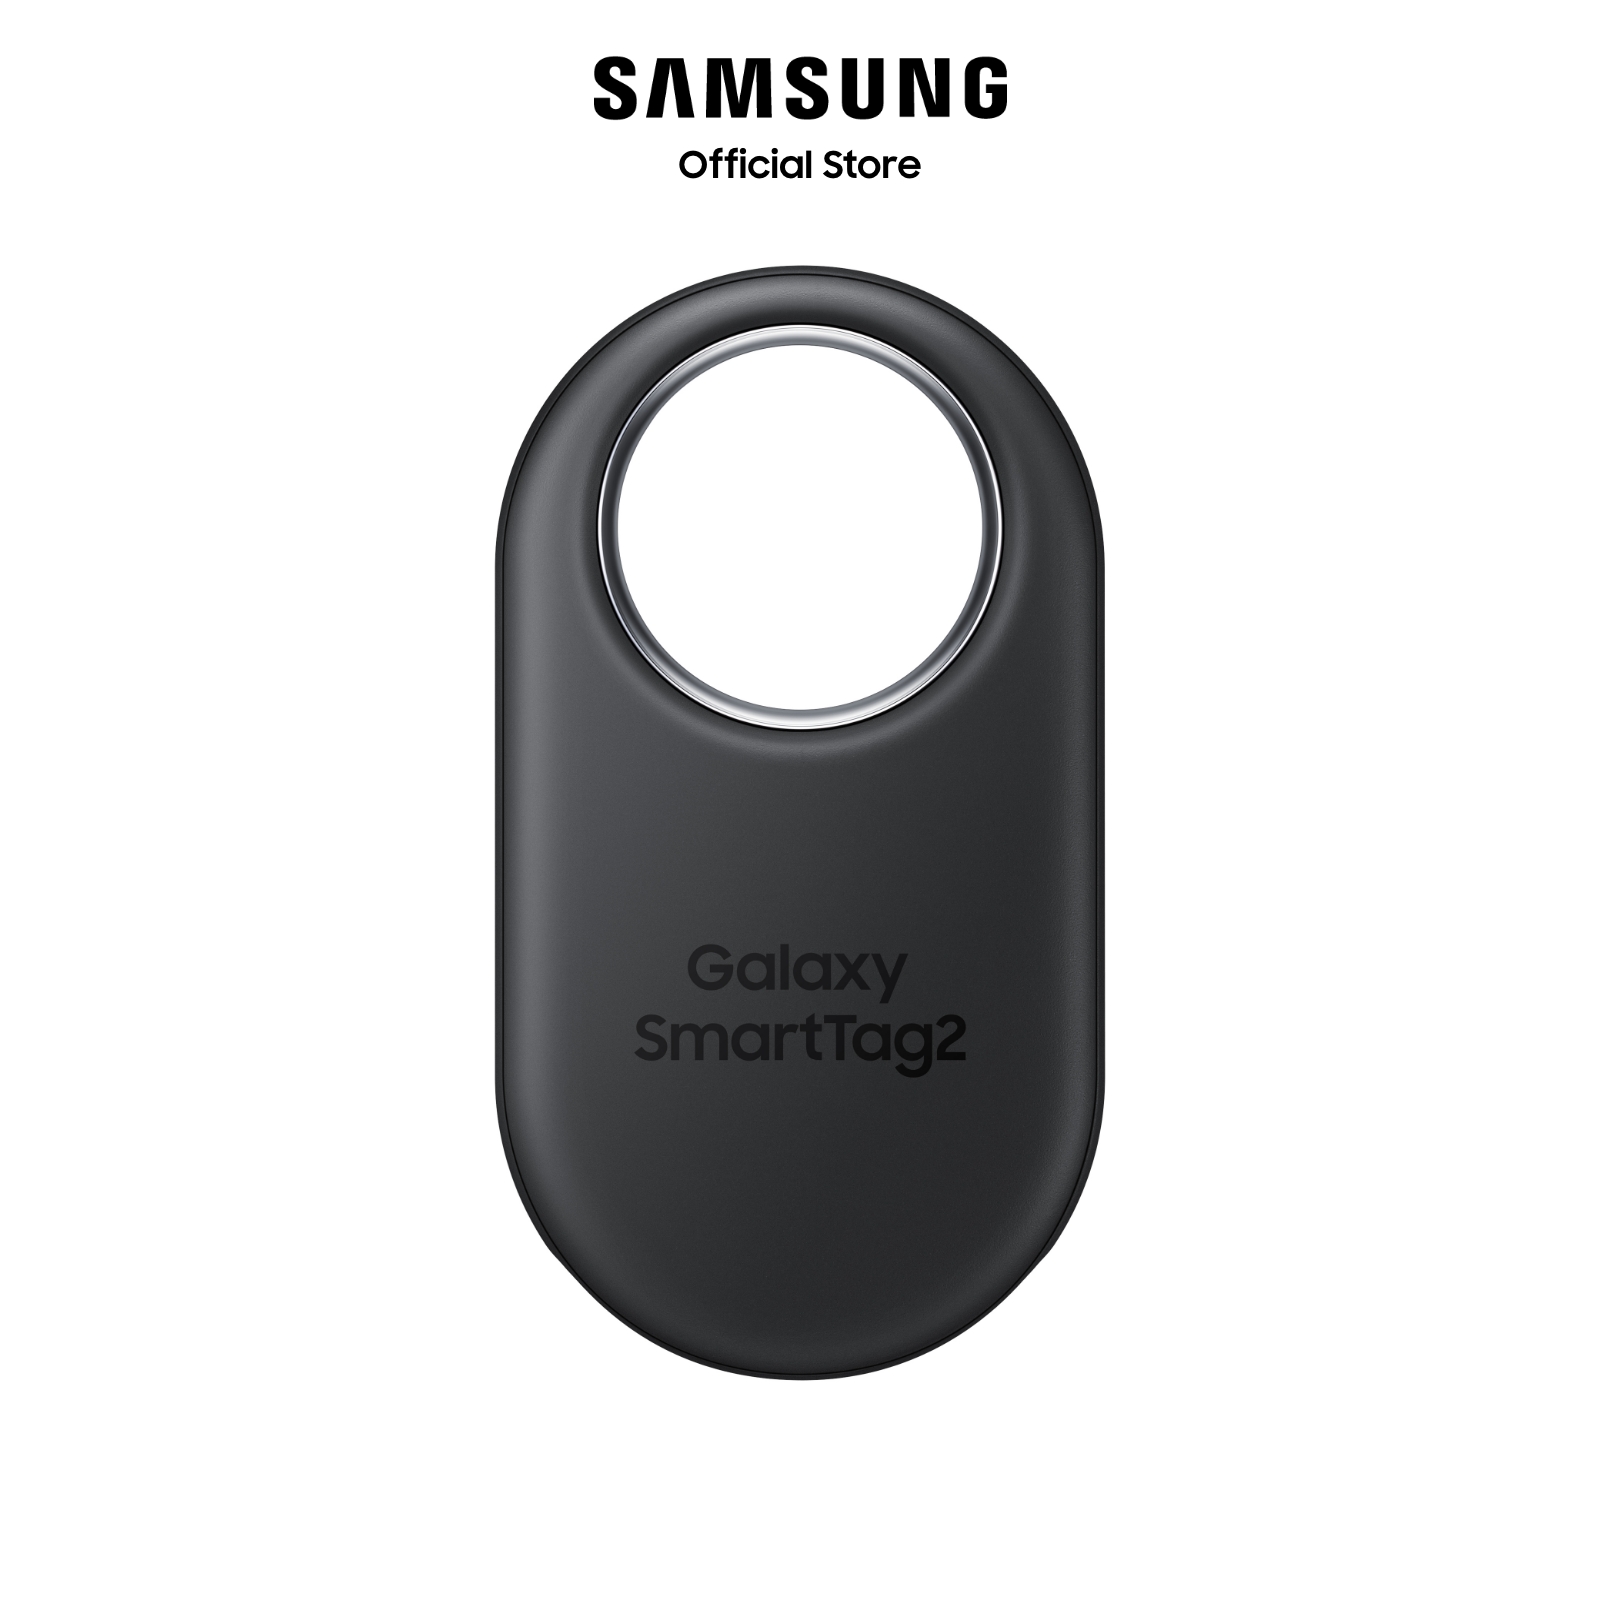 SAMSUNG Galaxy SmartTag Bluetooth Smart Home Accessory Tracker, Attachment  Locator for Lost Keys, Bag, Wallet, Luggage, Pets, Glasses, 2021, US